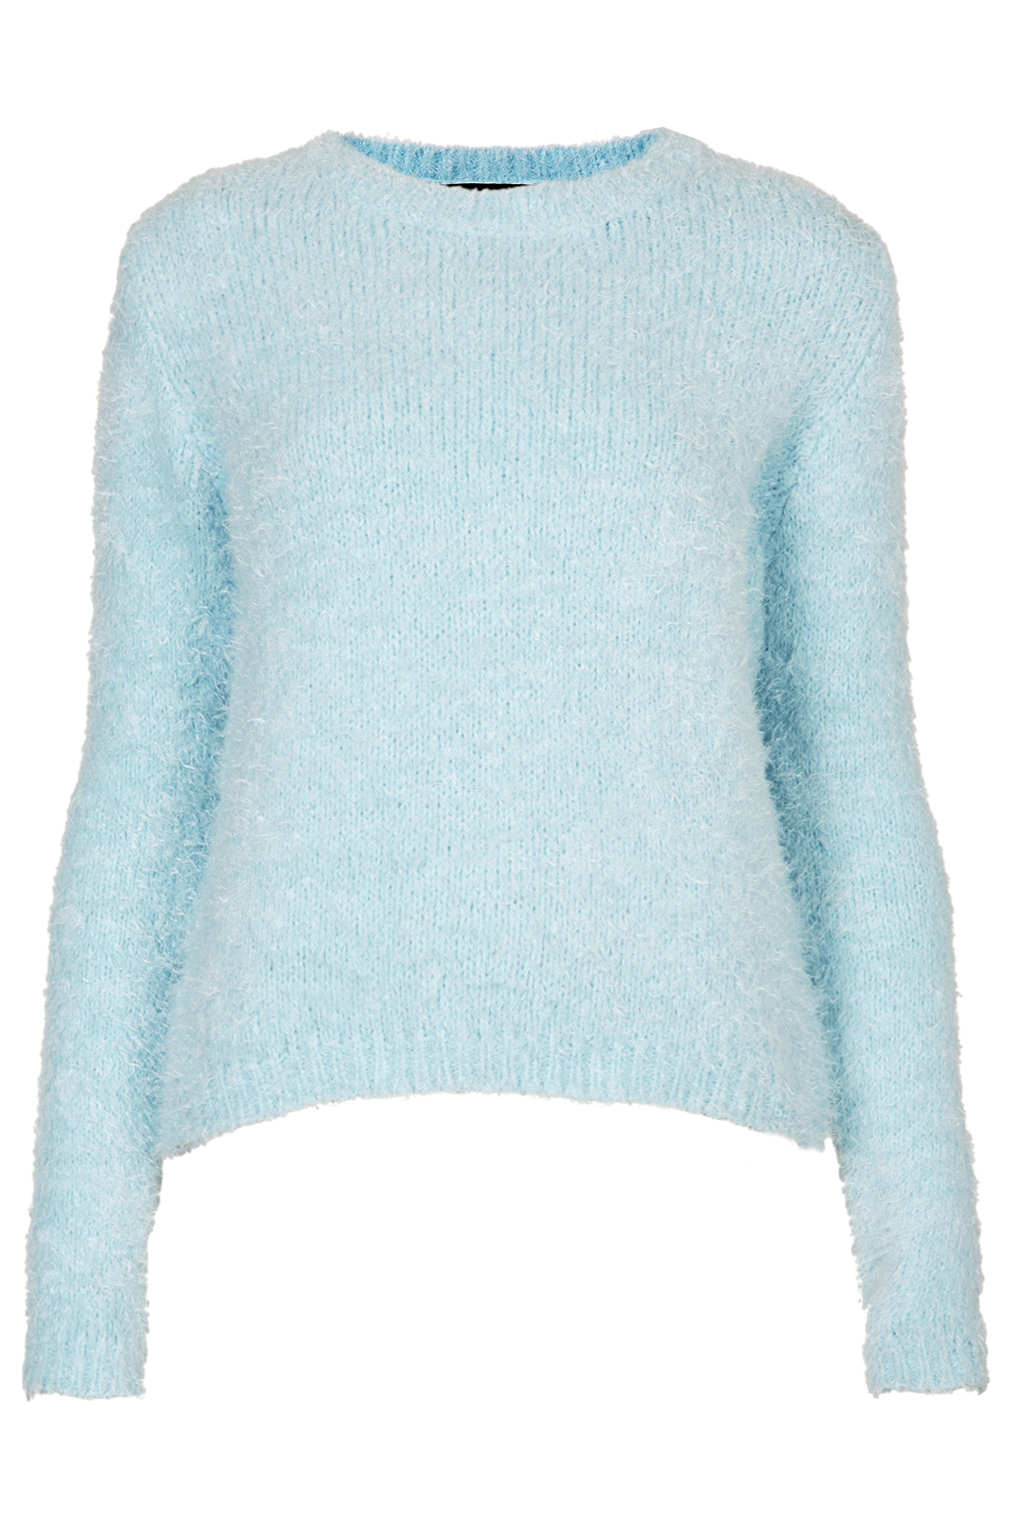 Topshop Tall Knitted Fluffy Crop Jumper in Blue (PALE BLUE) | Lyst